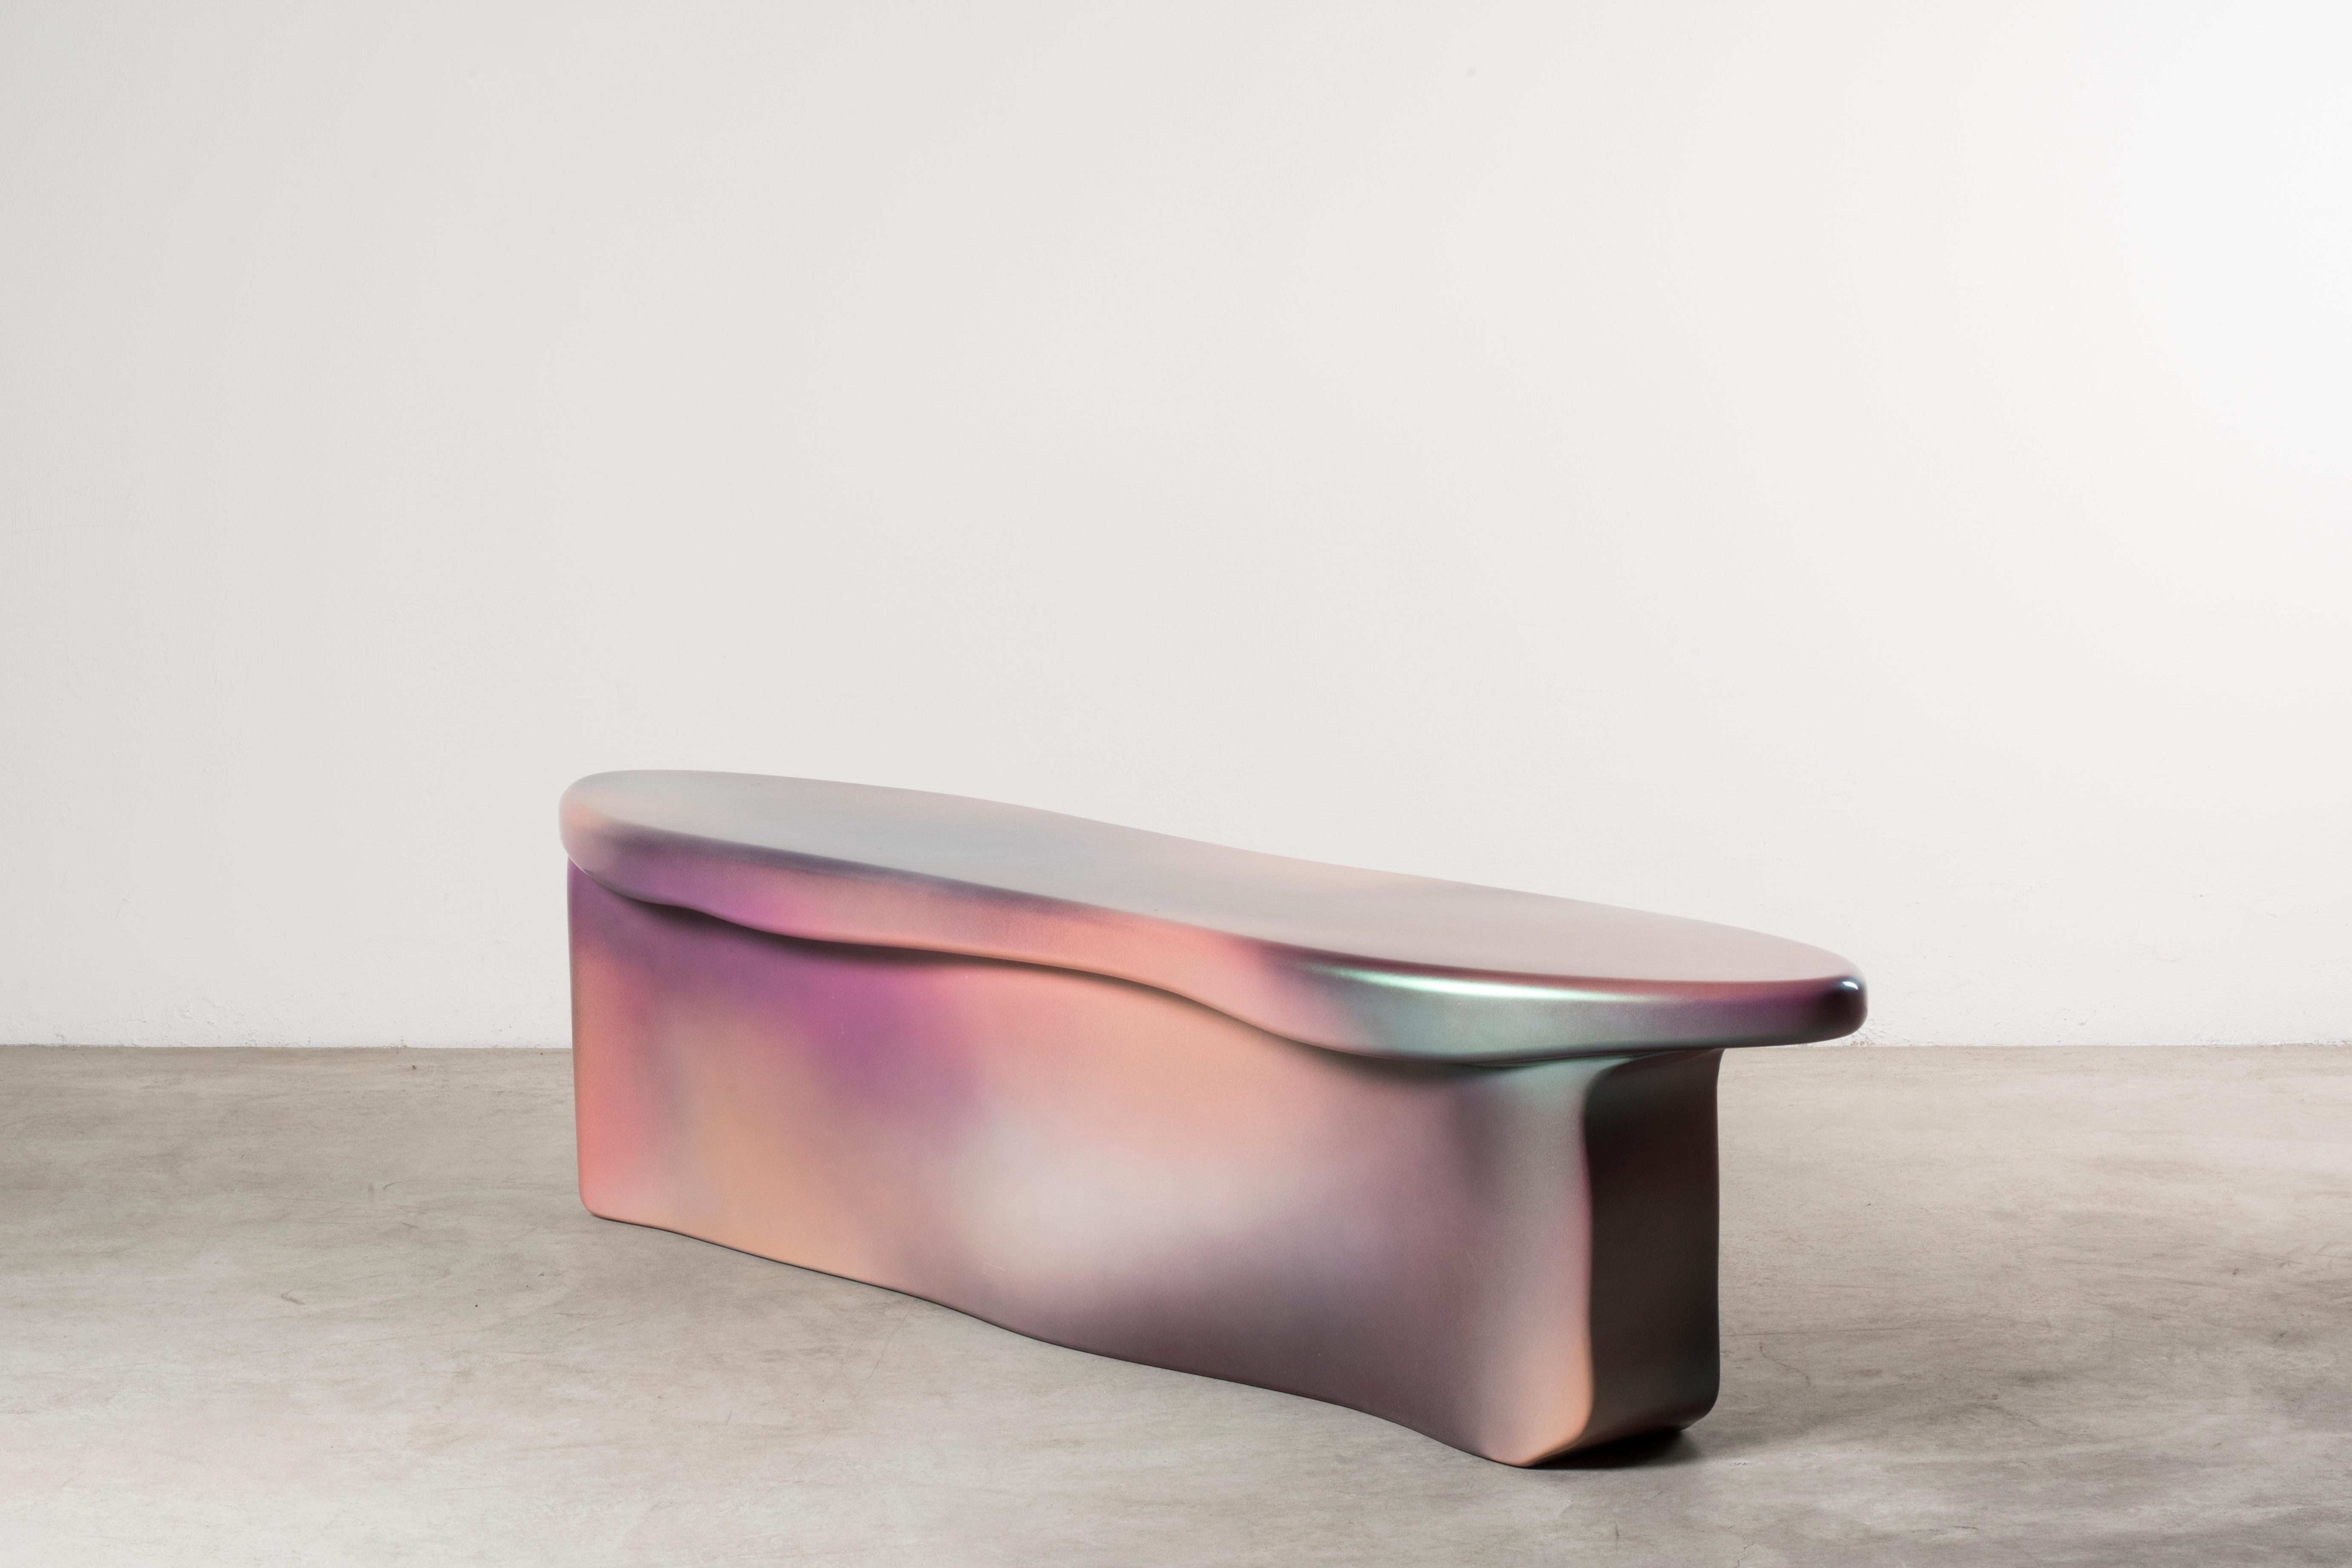 Guise 4 spray bench by Odd Matter, Italy, 2018. Nilufar edition. EPS foam, spray. Measures: 163 x 40 x H 36 cm, 64.2 x 15.7 x H 14.2 in. Guise explores the first encounter? Through the potential of spray painting. Surfaces protect what is below and